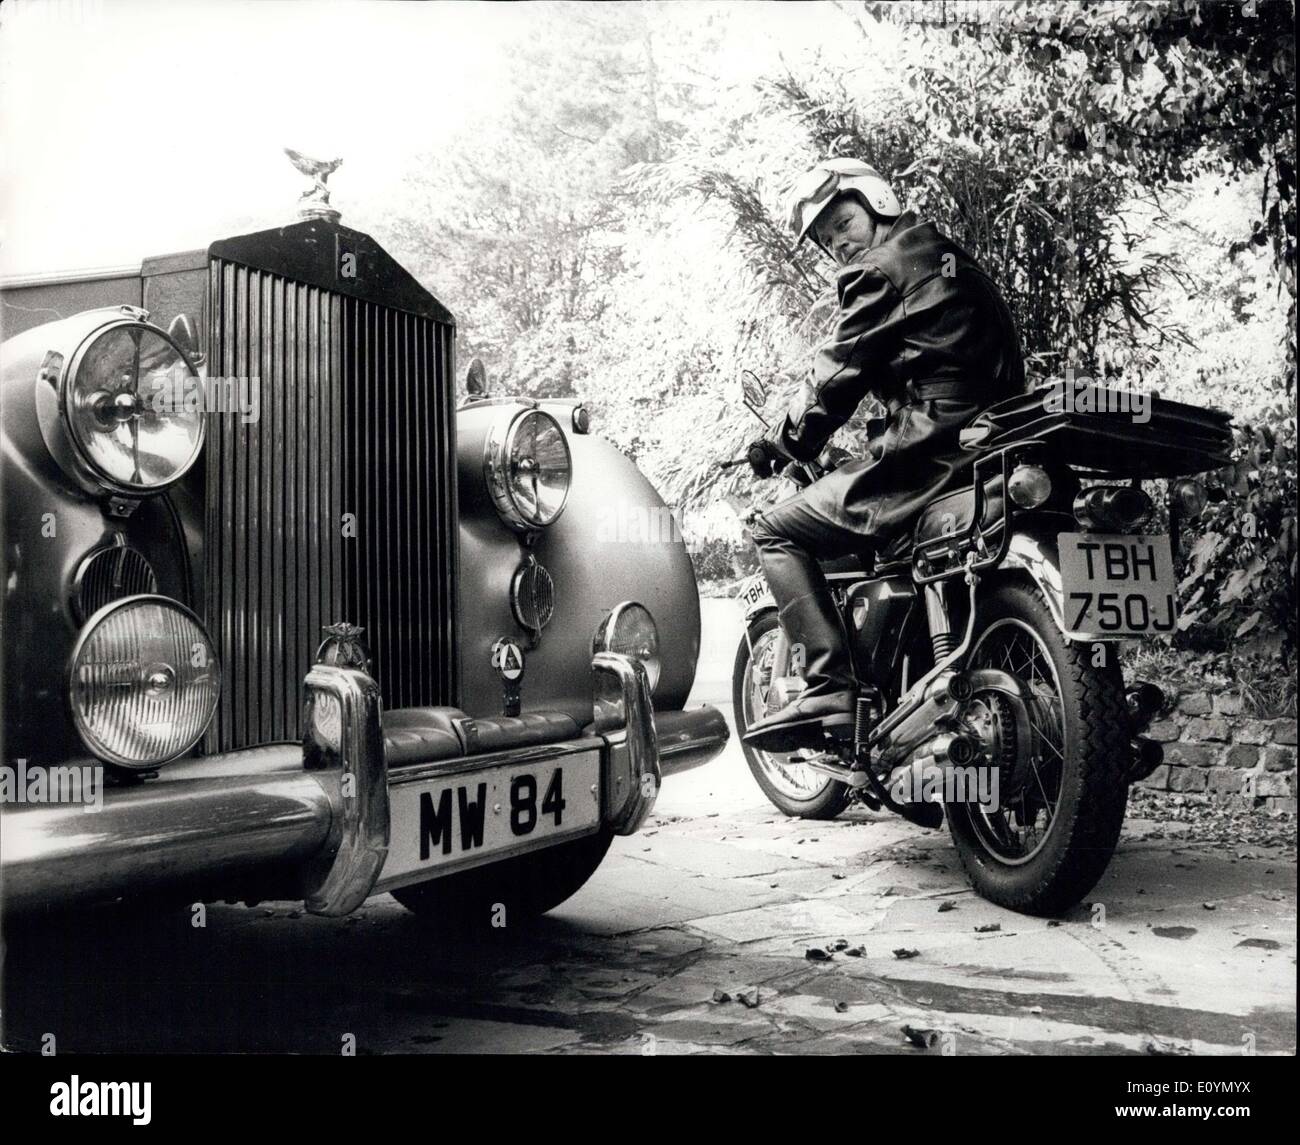 Oct. 31, 1970 - Managing director leaves his Rolls Royce in the Garage and sets off to his London office on a Motor Cycle : Each morning managing director Michael Wood leaves his Rools Royce in the garage - and sets off for his London office on his Japanese motor cycles. It used to take him an hour and a half along the M. 4 from his Maidenhead home to his Piccadilly, London, office. New it takes him just ever 50 minutes. His Rolls does cycles does 55. Said 42-year-old Mr. Wood, of Bath Road, Maidenhead. ''I get tired of travelling to London every day through heavy traffic Stock Photo